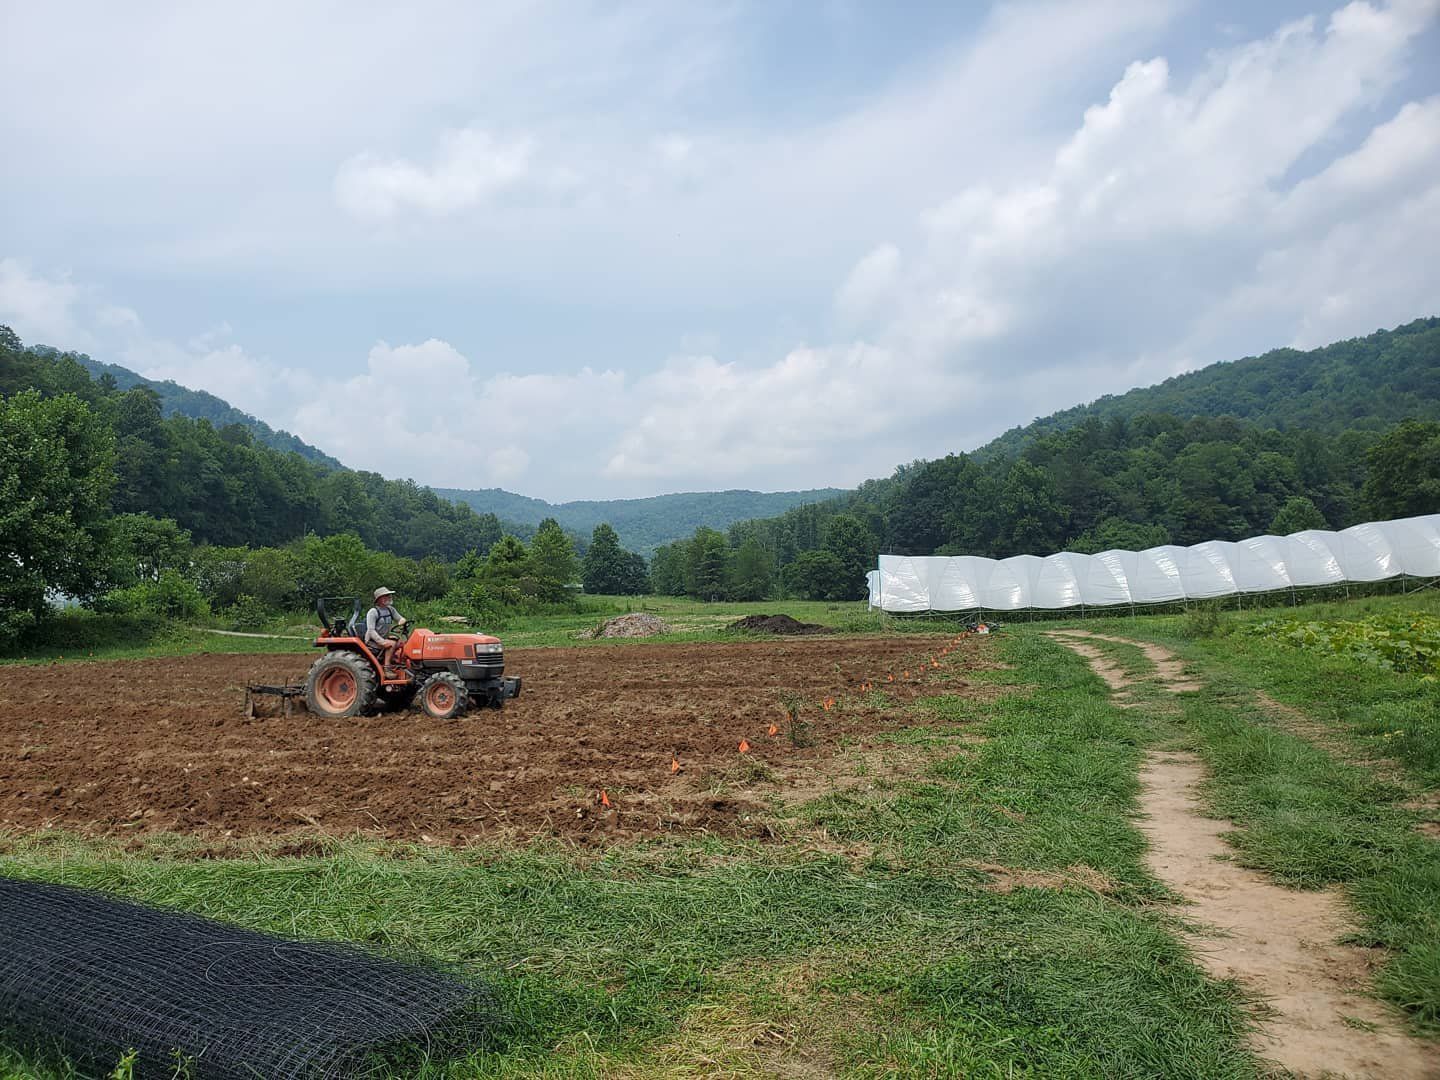 Next Happening: Farm Happenings for July 27, 2021